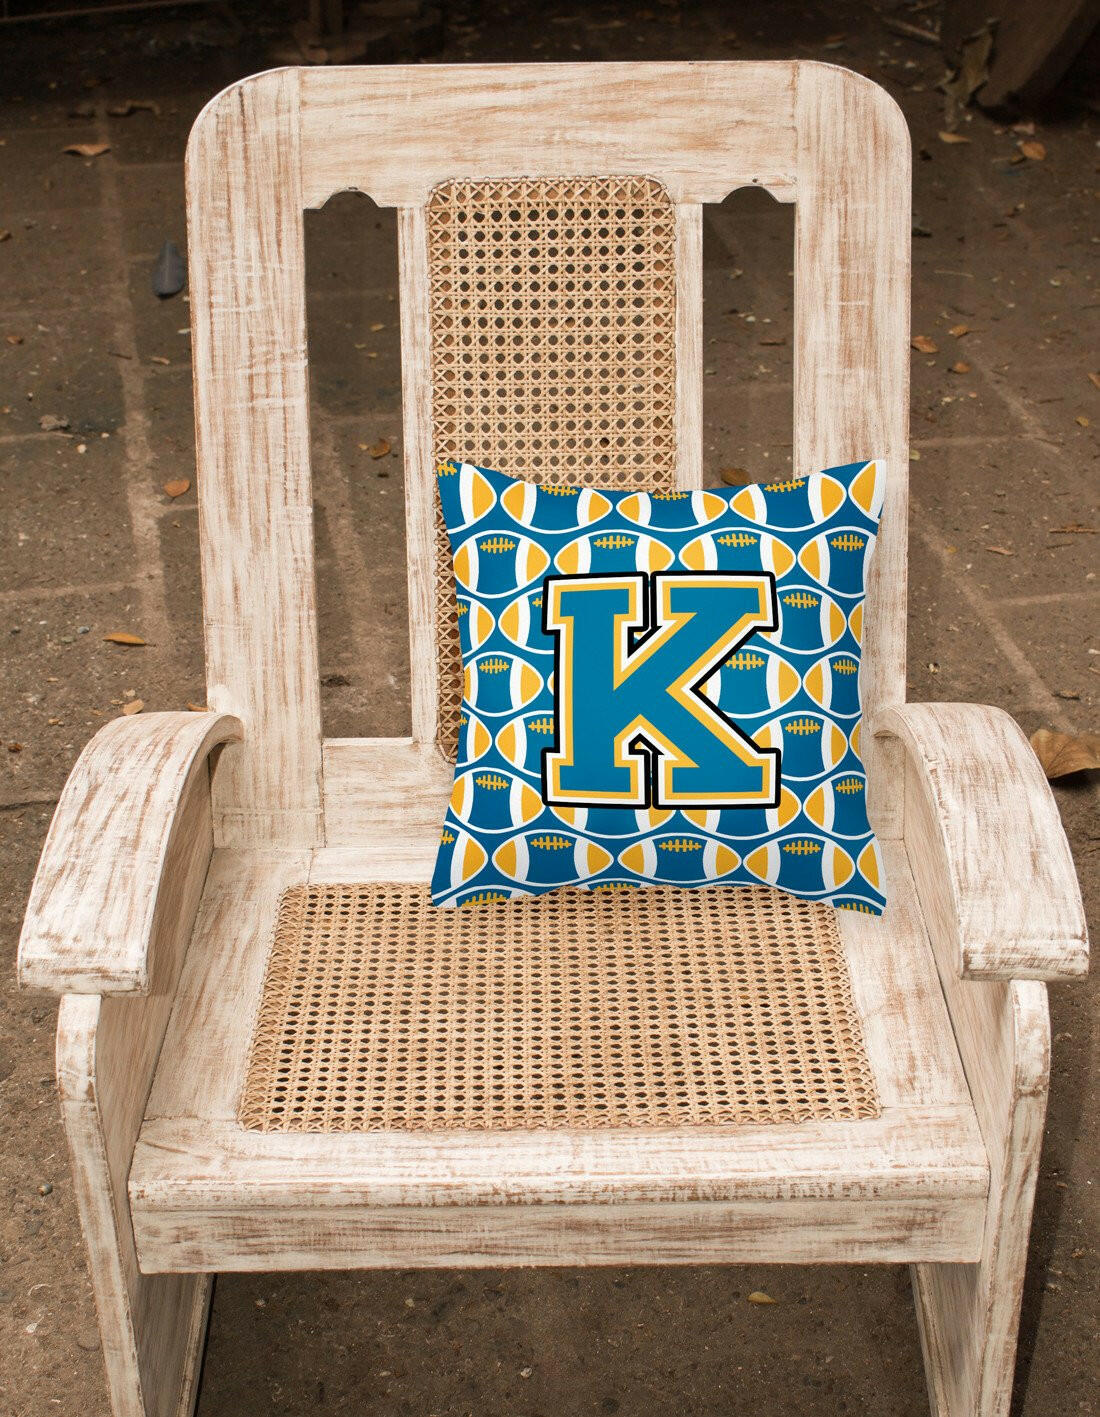 Letter K Football Blue and Gold Fabric Decorative Pillow CJ1077-KPW1414 by Caroline's Treasures